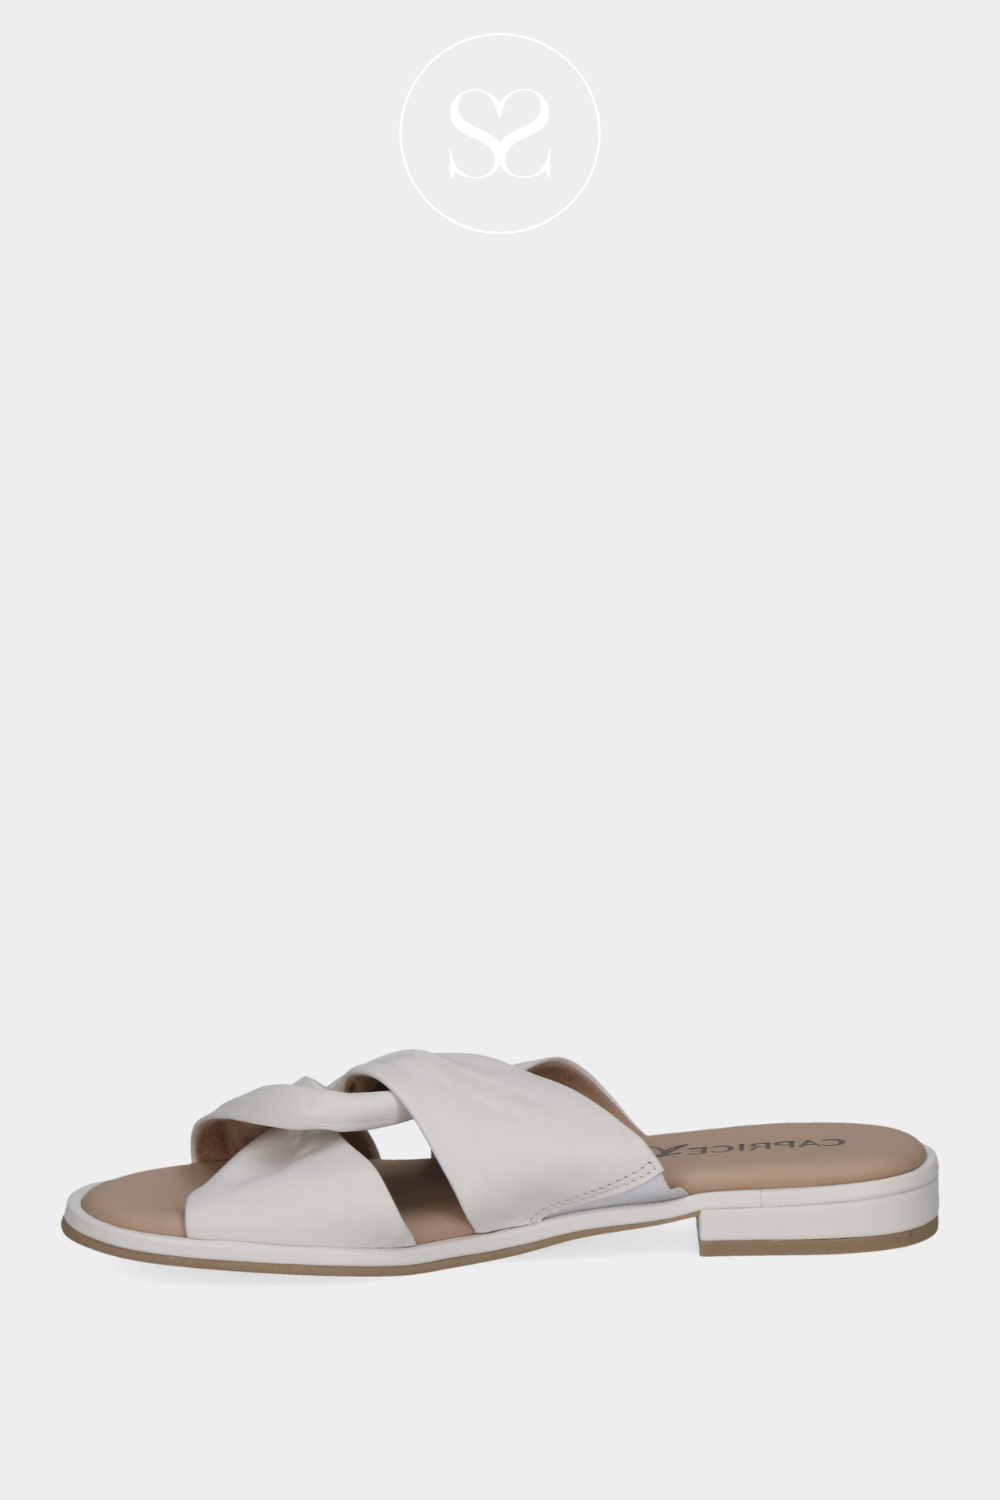 CAPRICE 9-27100-42 OFF WHITE SLIP ON SLIDER SANDALS WITH LEATHER CRISS CROSS STRAPS